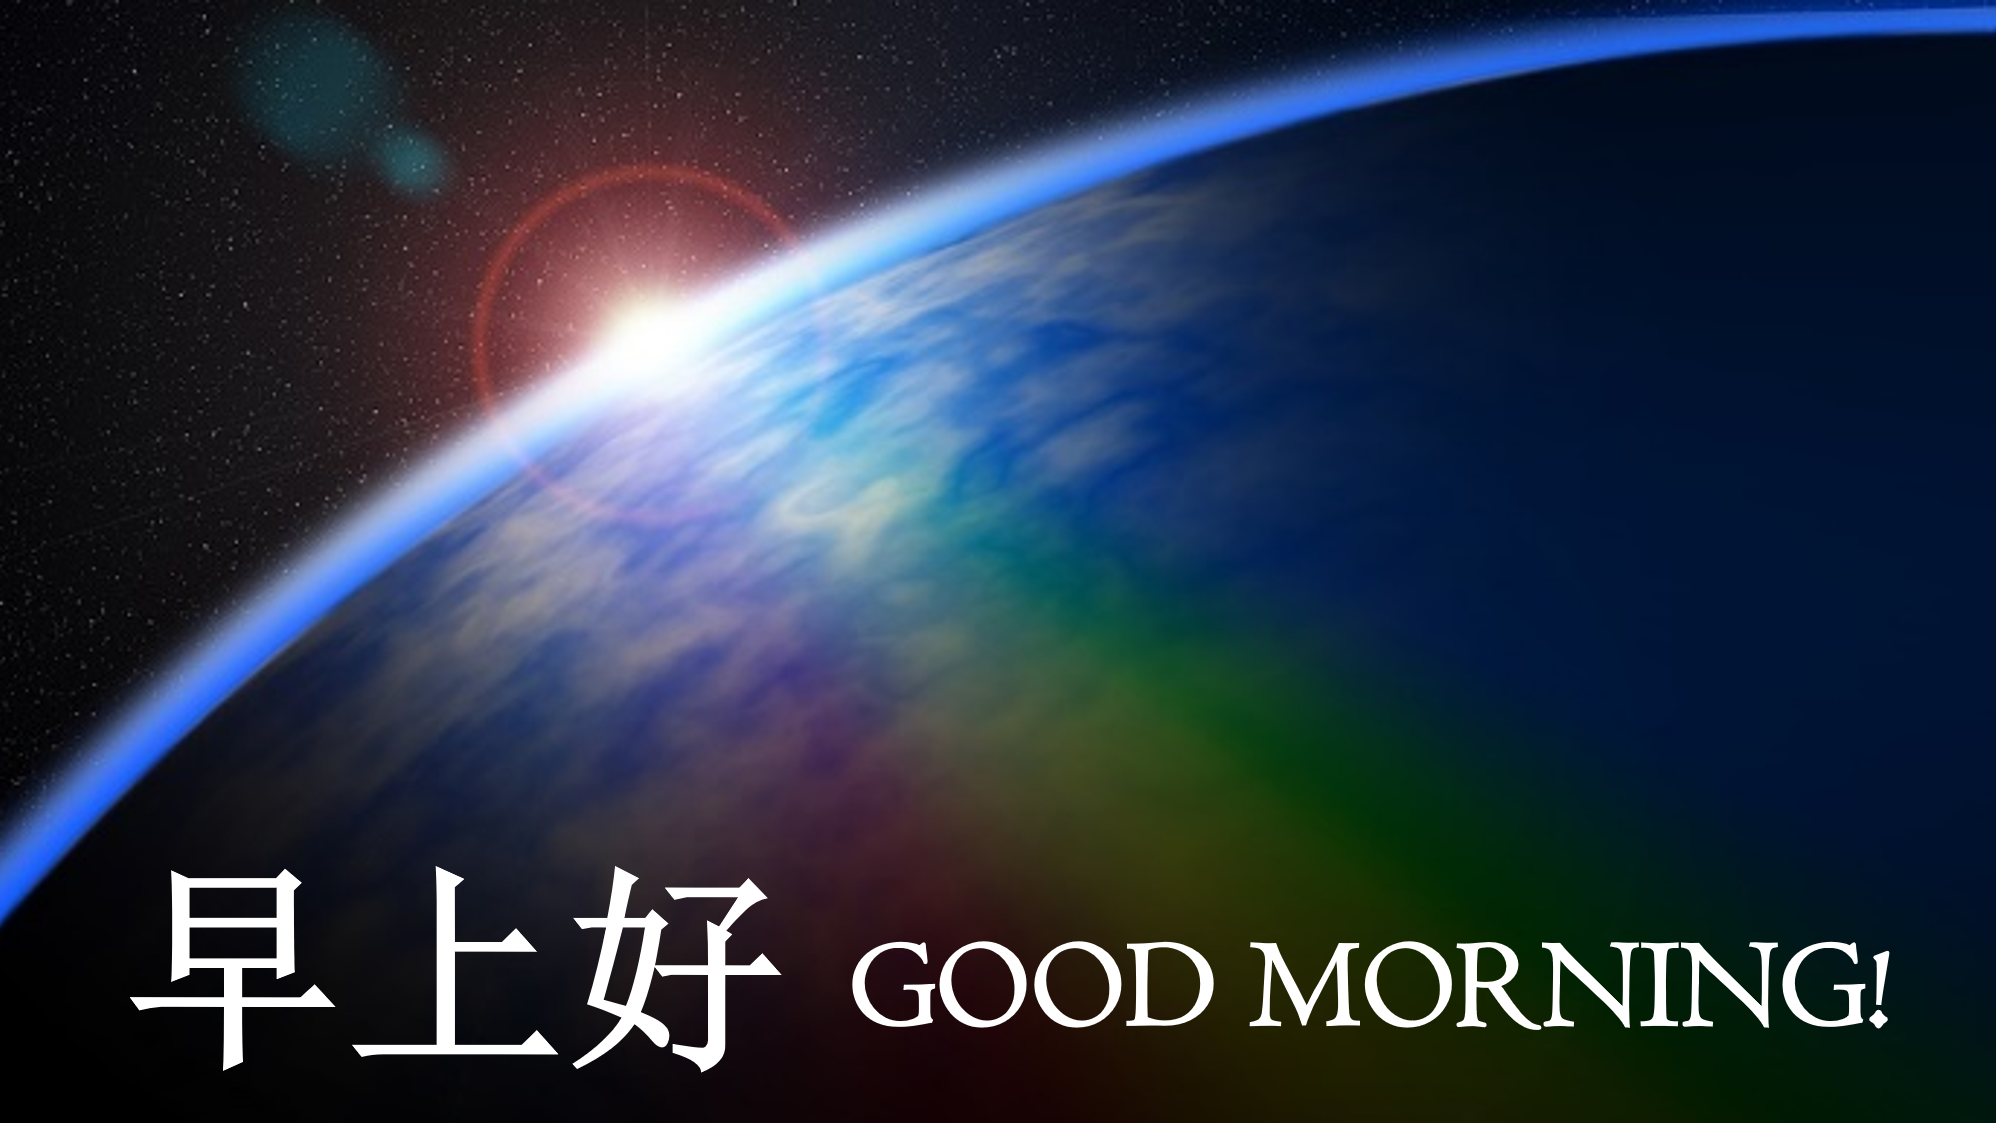 Good morning 早上好 Chinese Message 模板